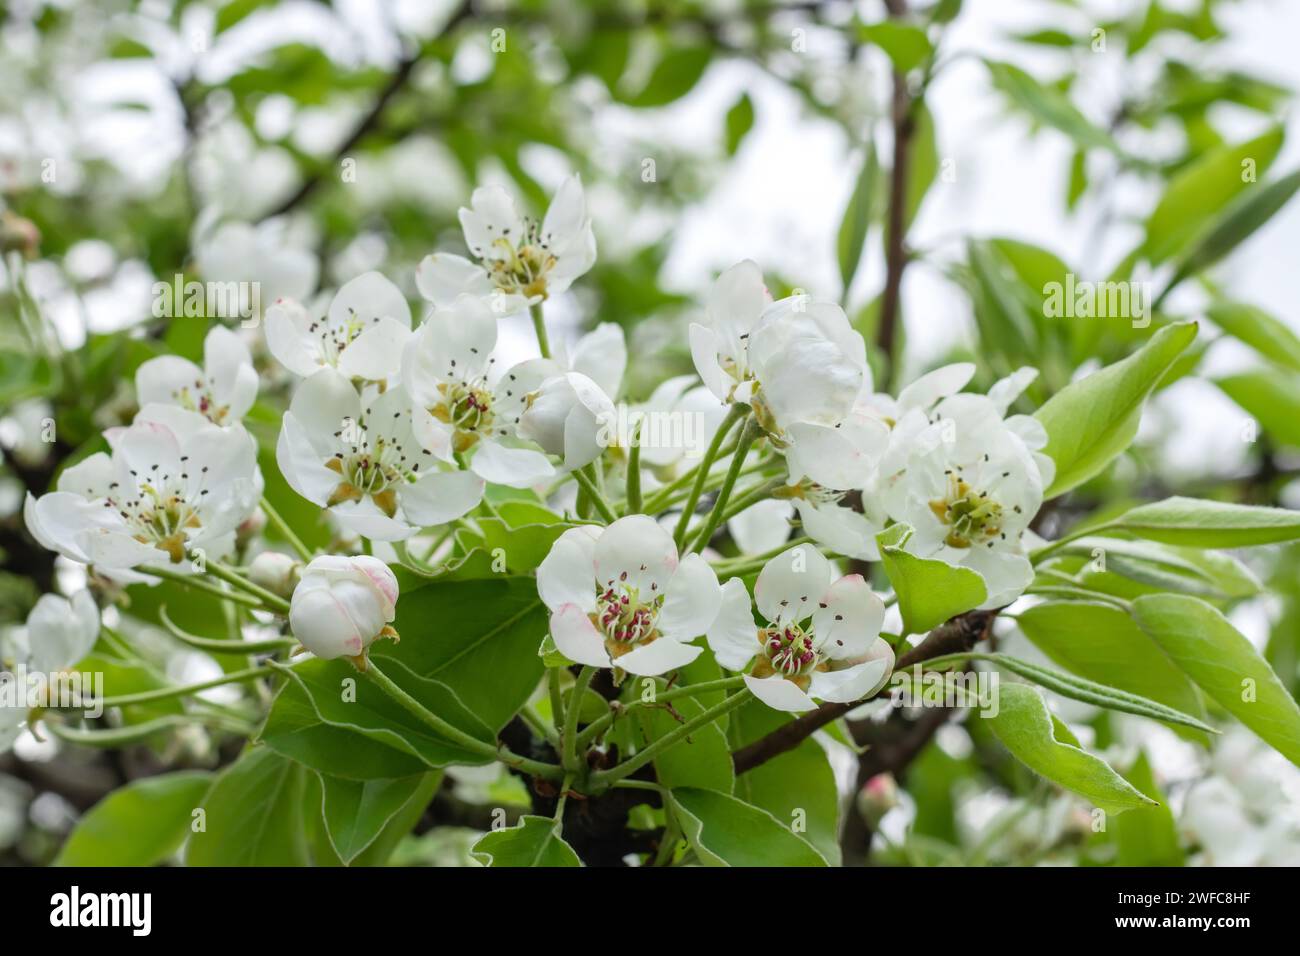 Pear tree blossom close-up. White pear flower on naturl background Stock Photo